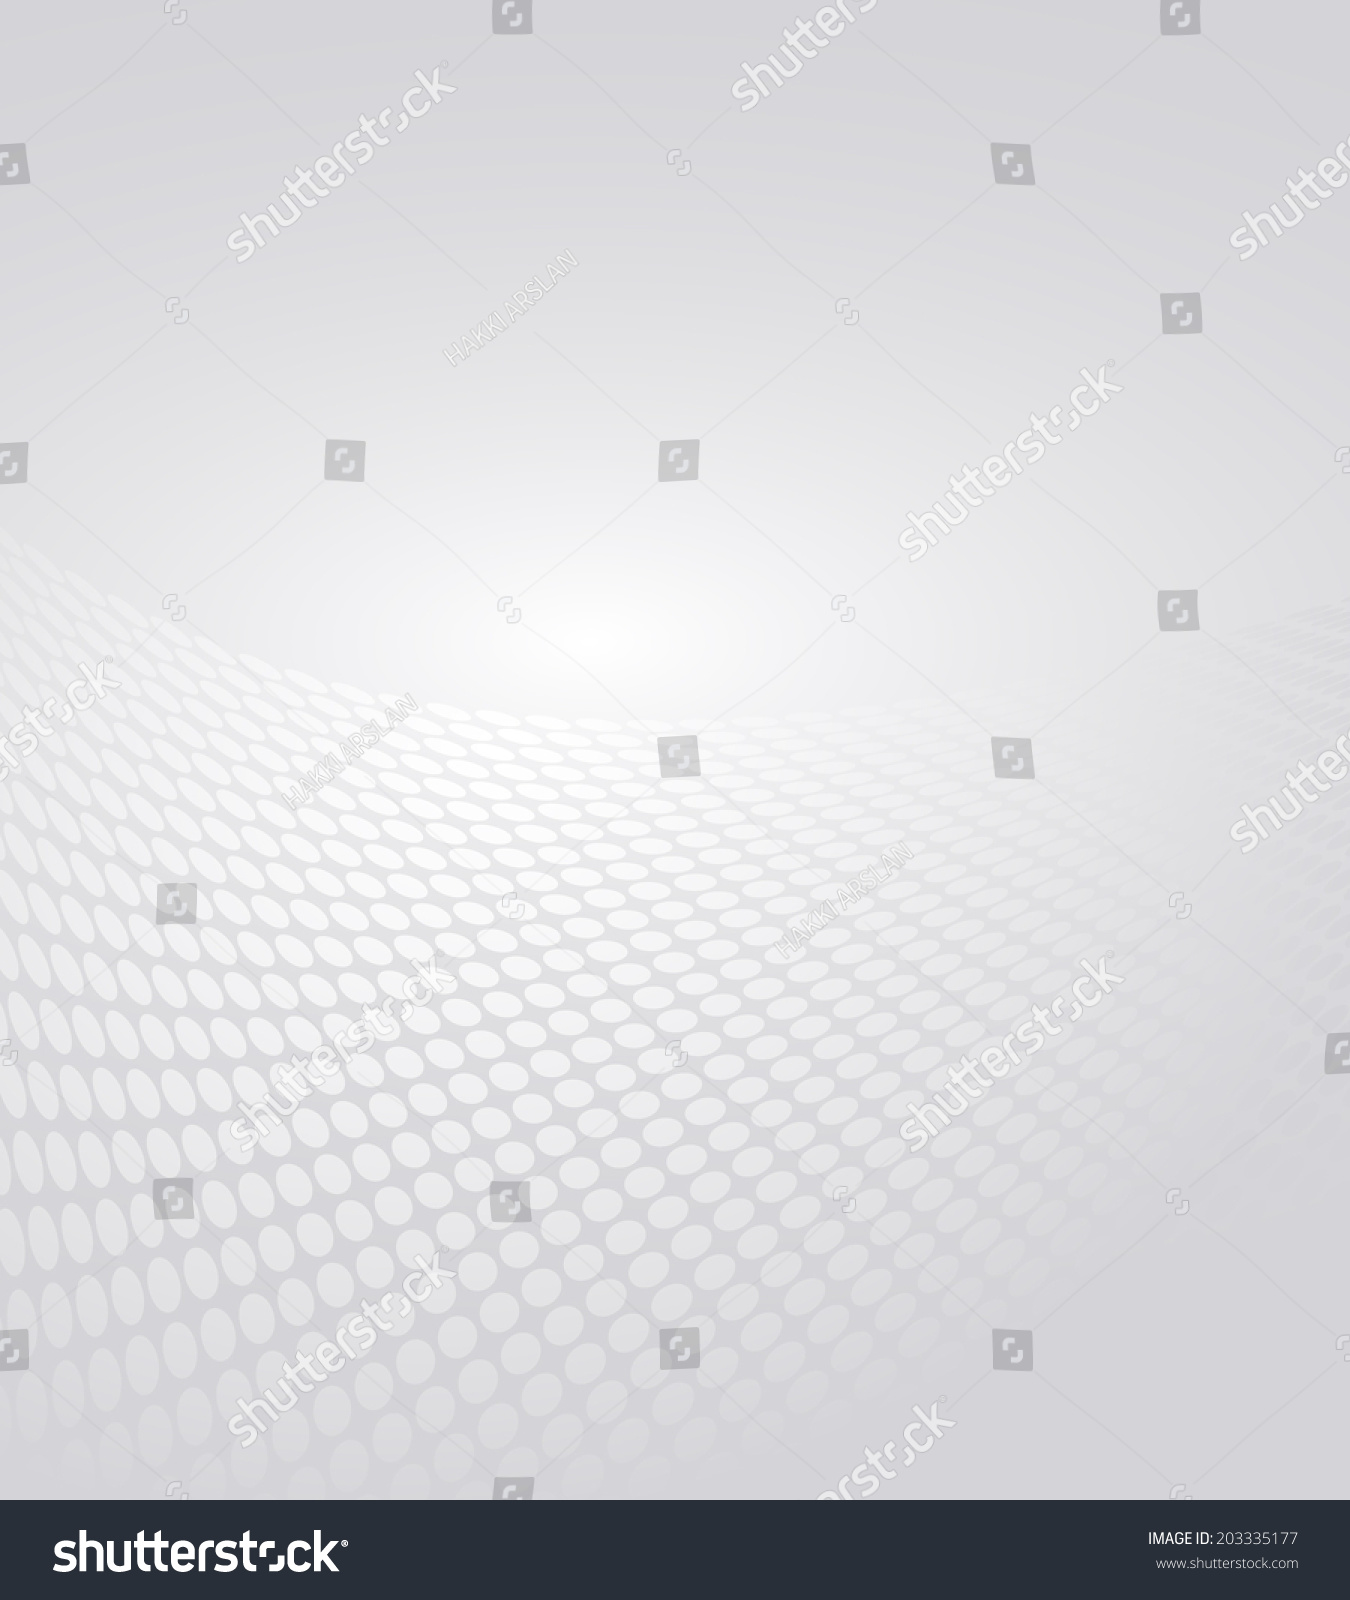 Abstract dotted halftone background, brochure edge layout. #203335177